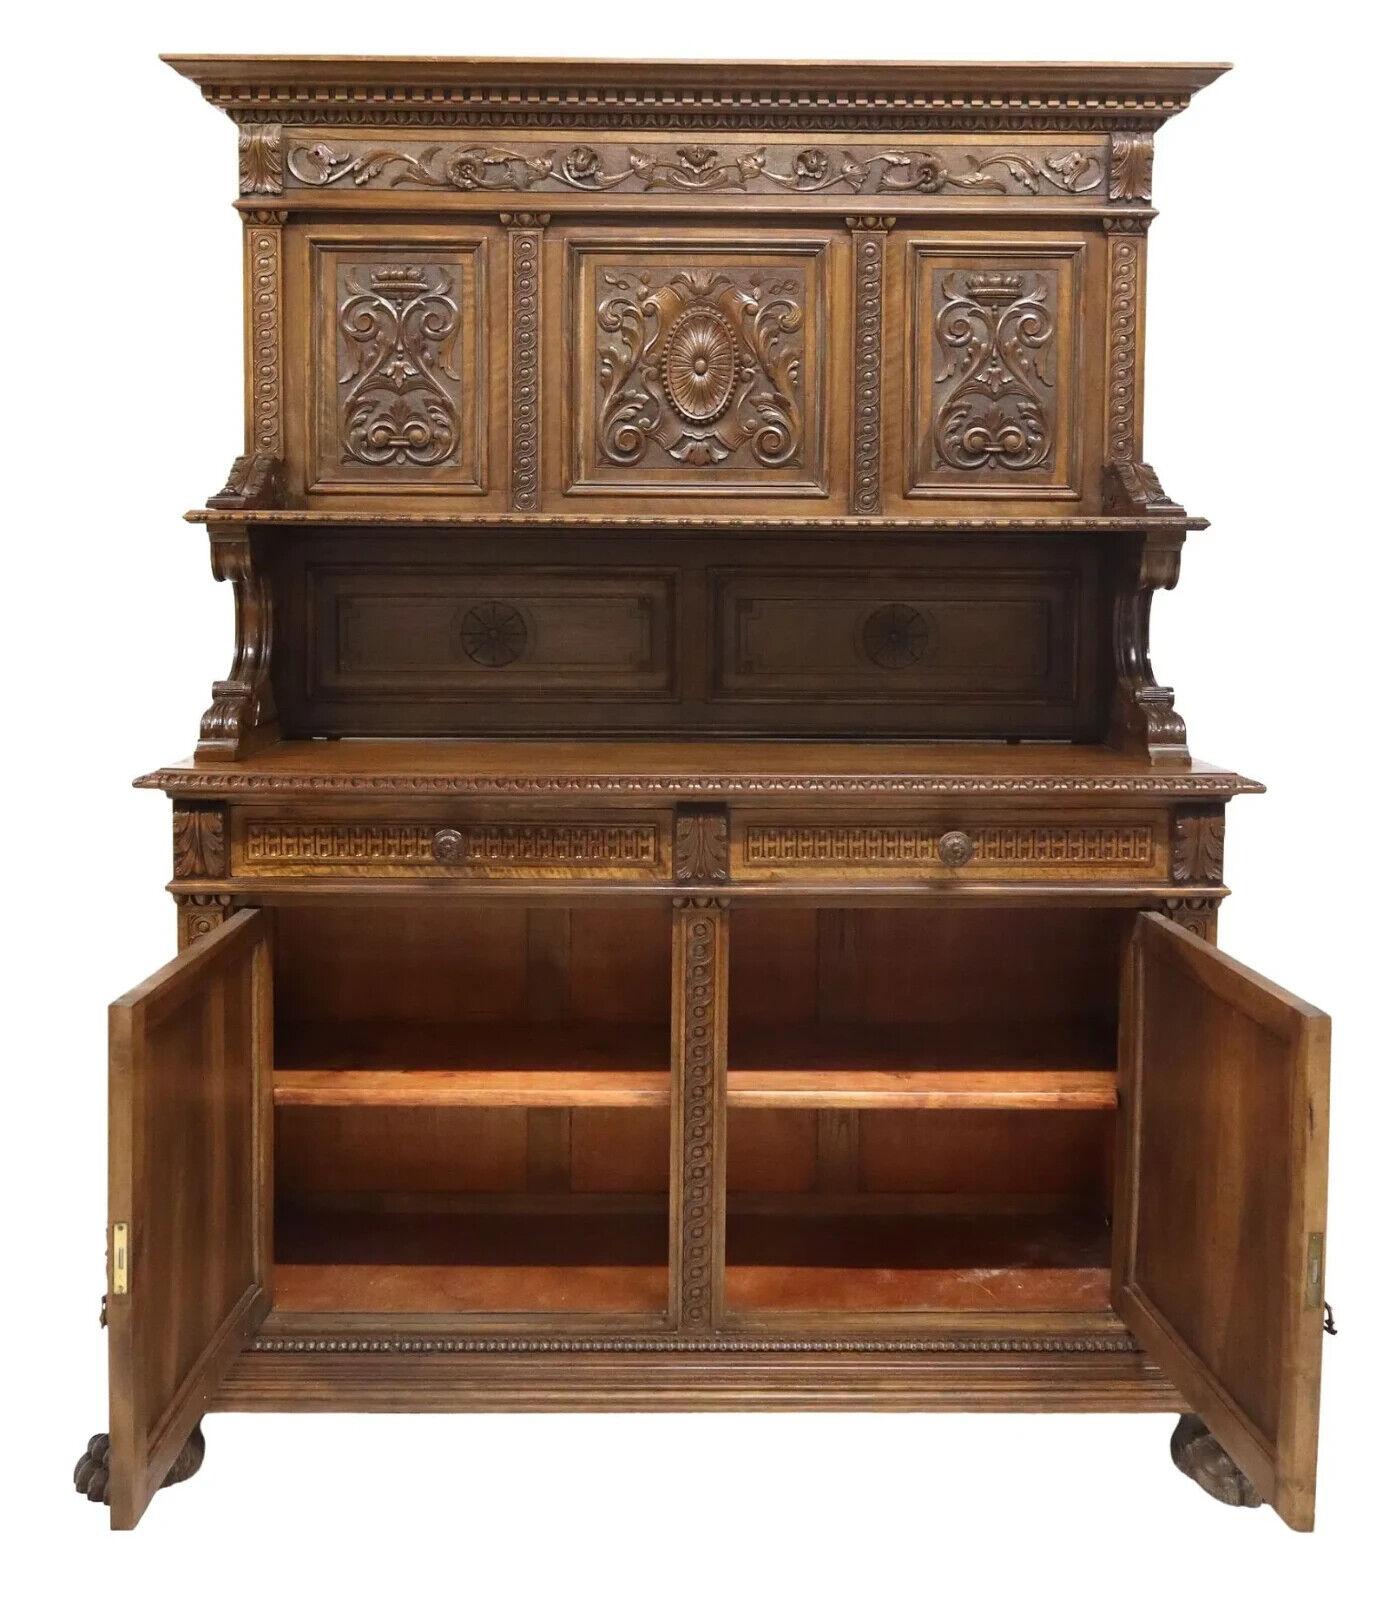 Early 1900's Italian Renaissance Revival, Carved, Walnut Sideboard In Good Condition For Sale In Austin, TX